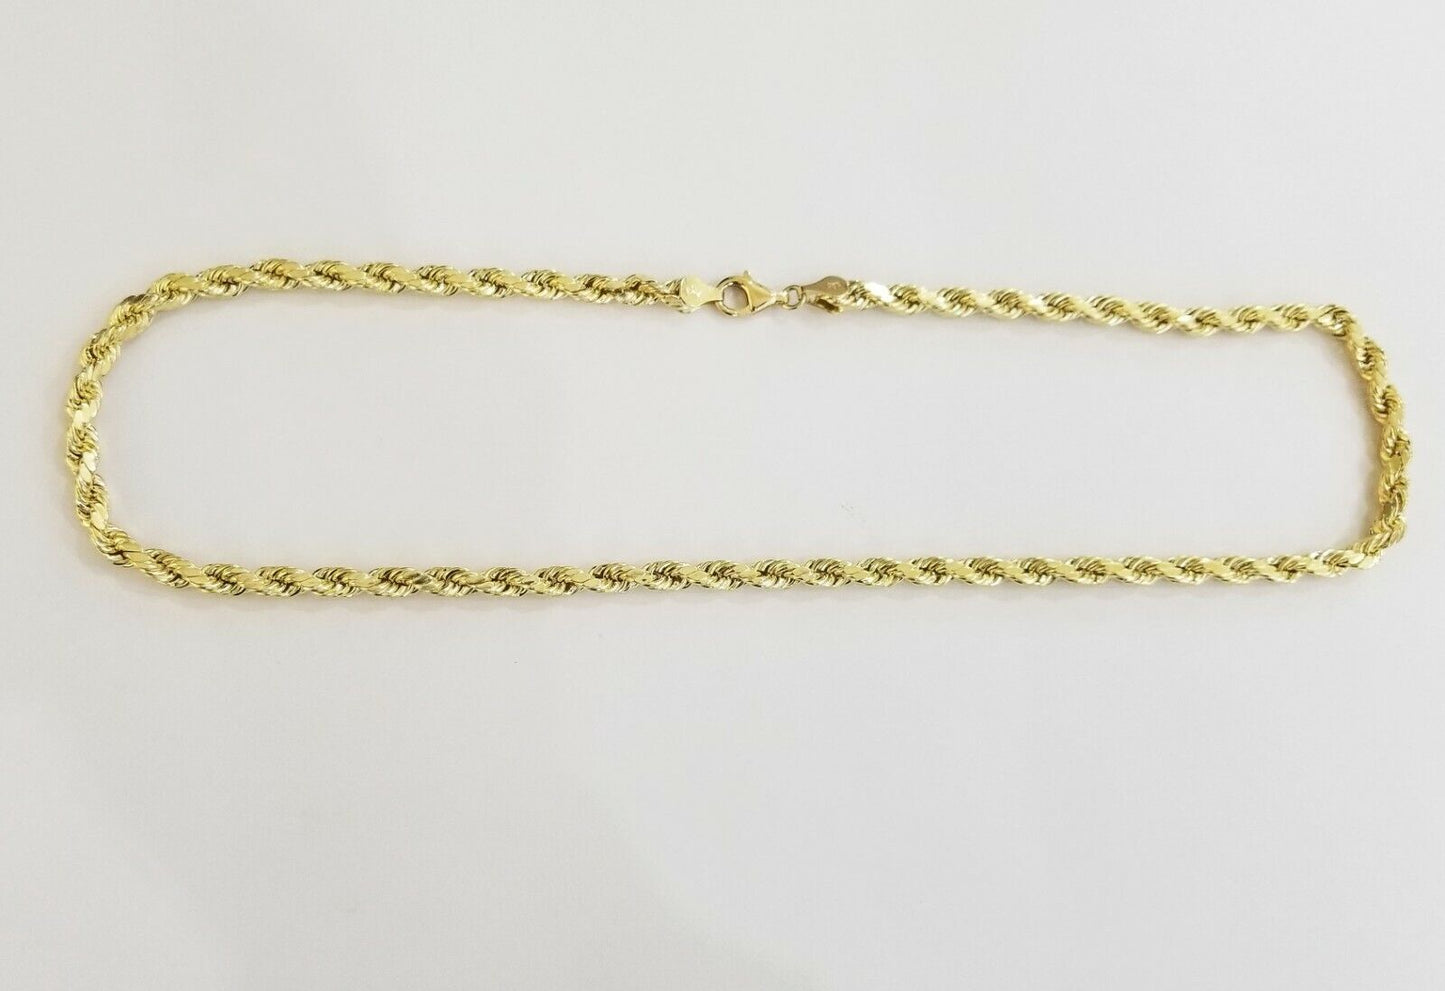 10k REAL Gold Rope Chain 6mm 20" Yellow gold Necklace Men women diamond cut